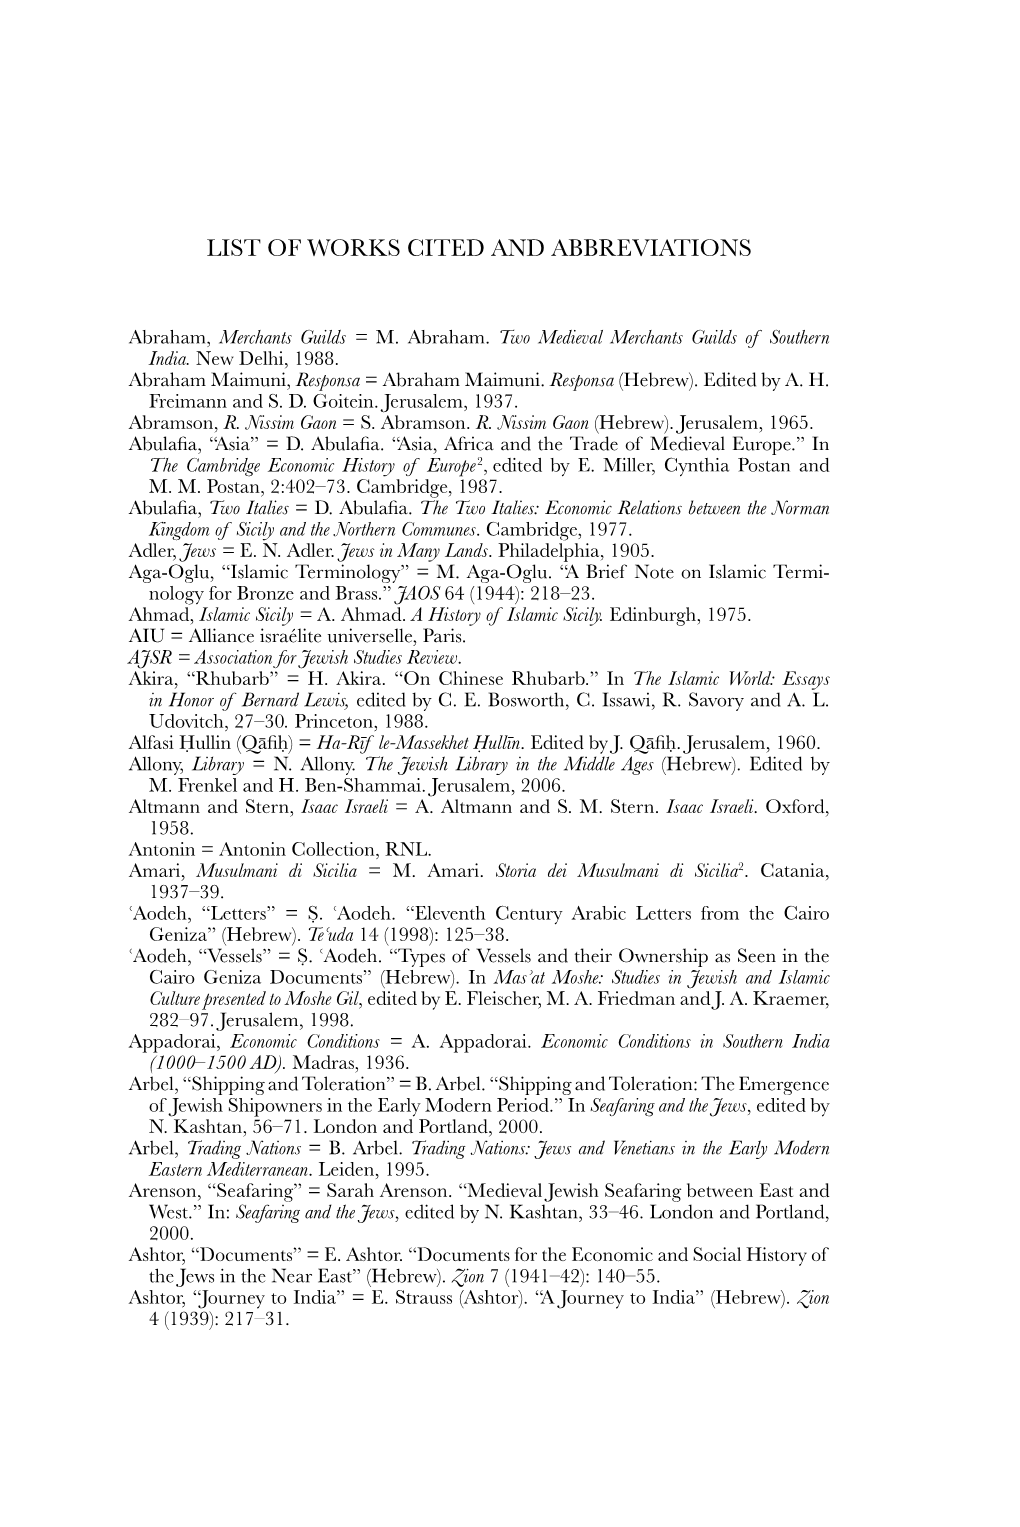 List of Works Cited and Abbreviations